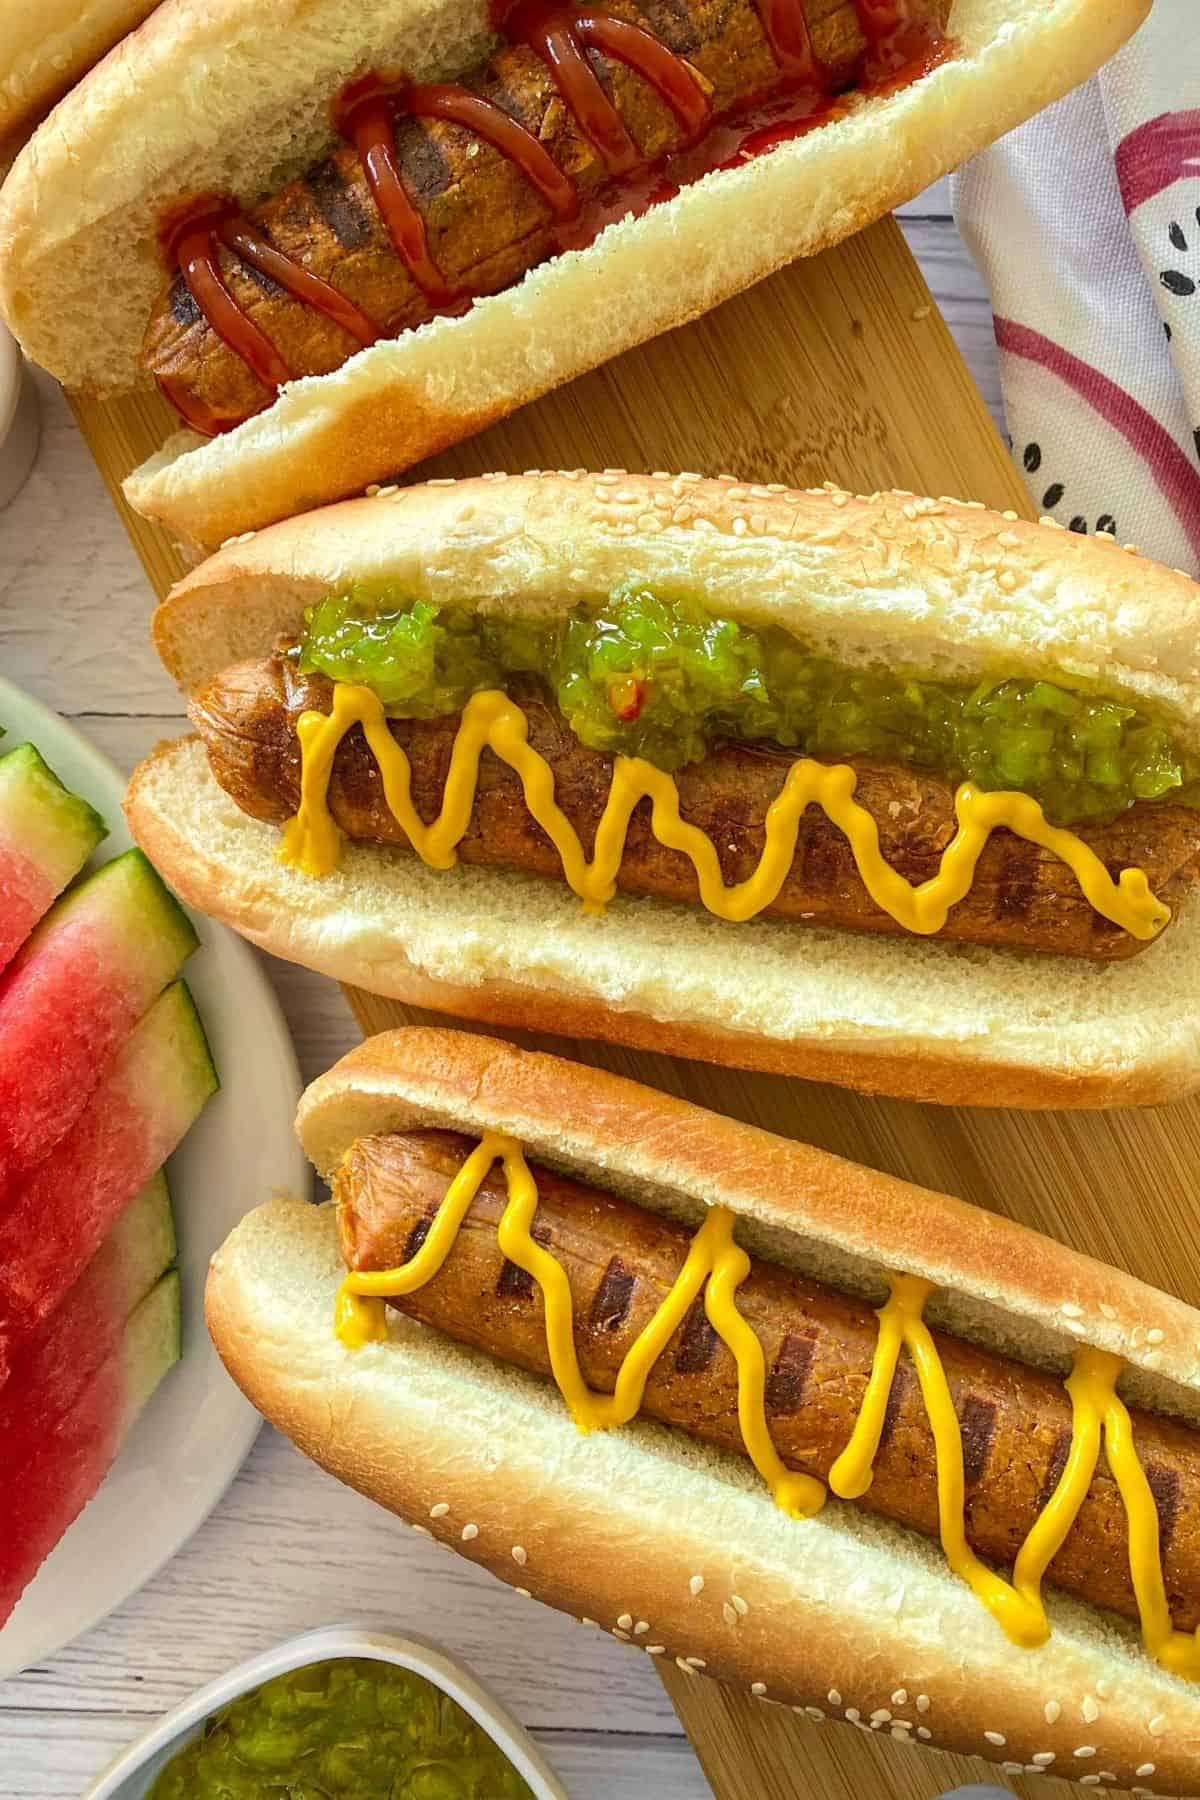 Seitan hot dogs in buns with mustard, relish and ketchup on cutting board.